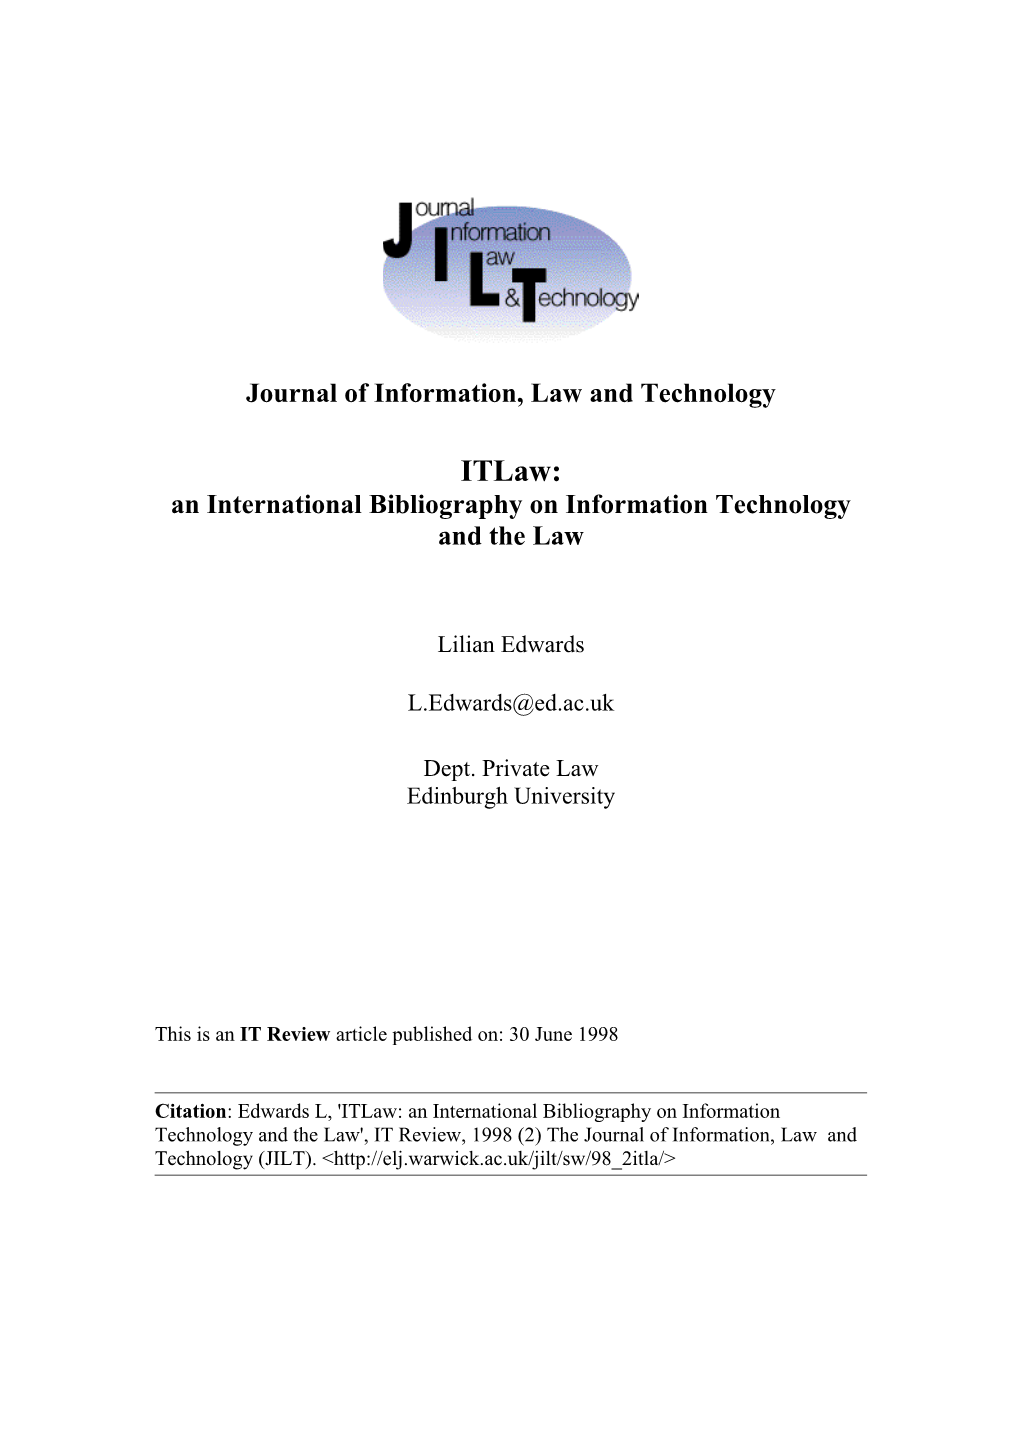 Itlaw : an International Bibliography on Information Technology and the Law